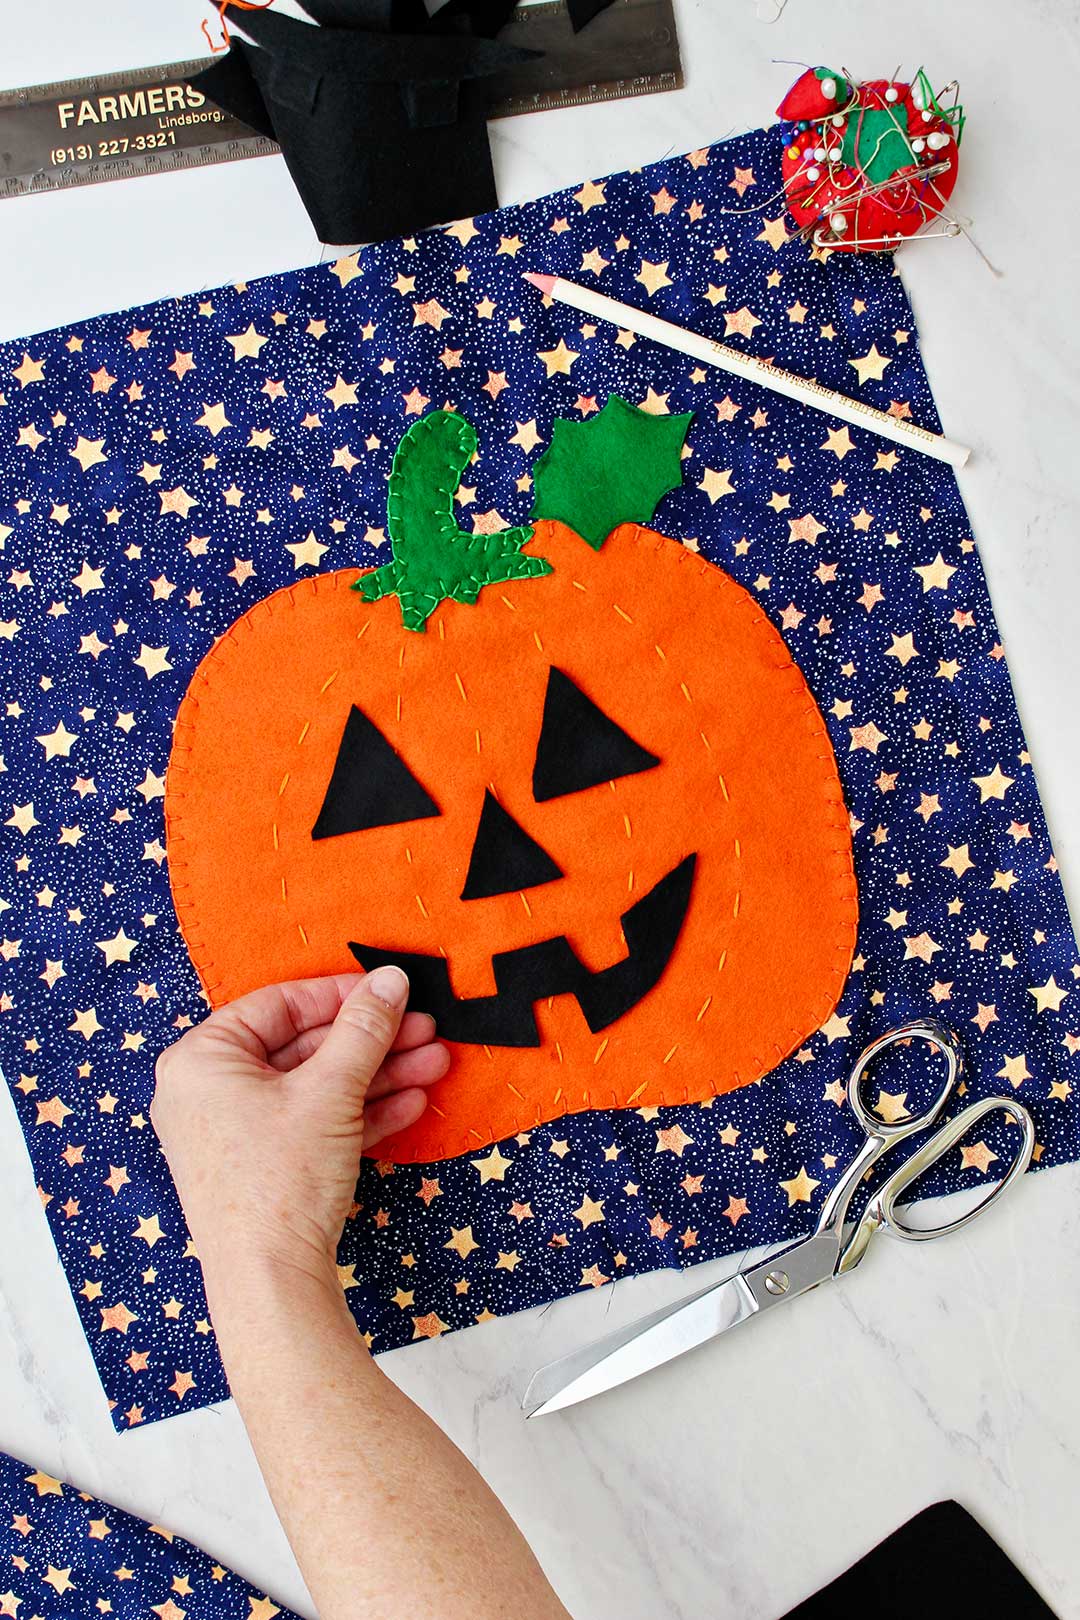 Hand placing the black felt cut out of a jack-o-lantern mouth on sewed pumpkin decoration for pillow.